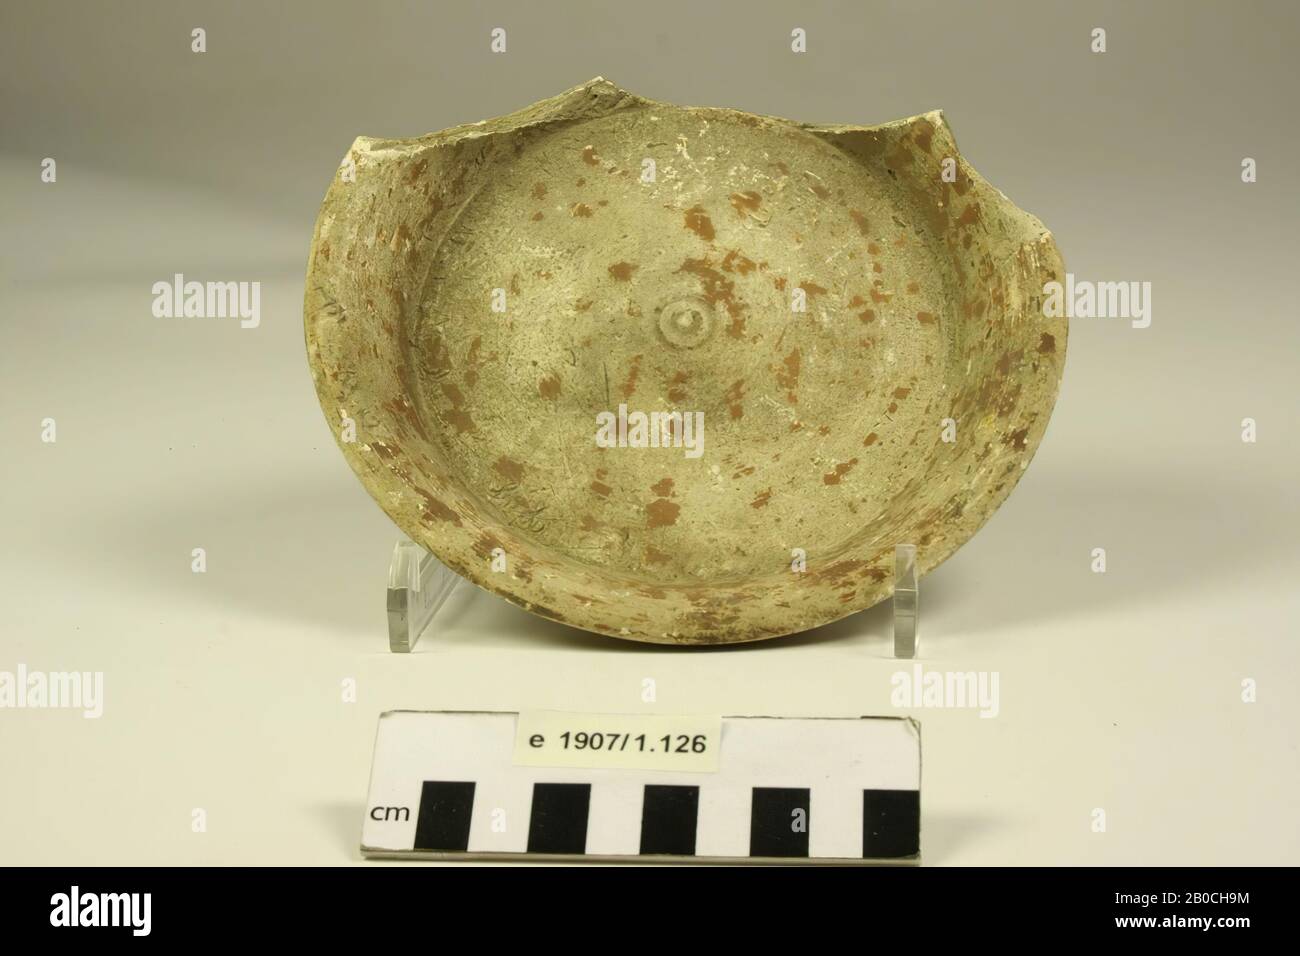 Dish, earthenware. The red sludge on the surface is damaged. Approximately 1 Stock Photo